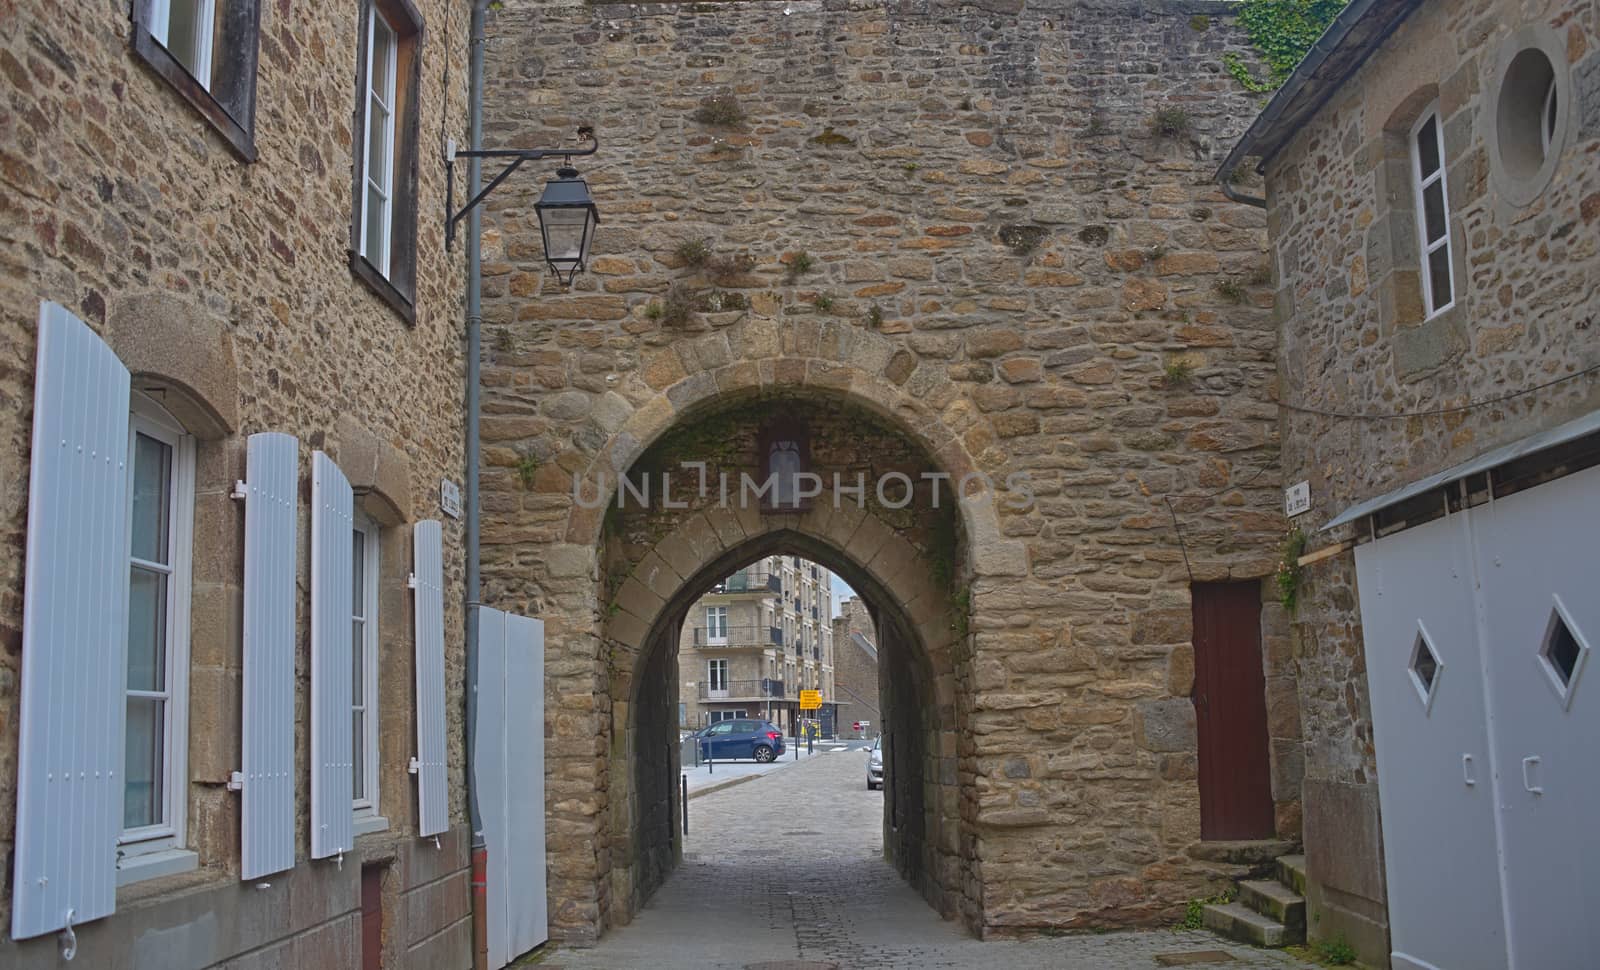 Exit gate from old town at Dinan, France